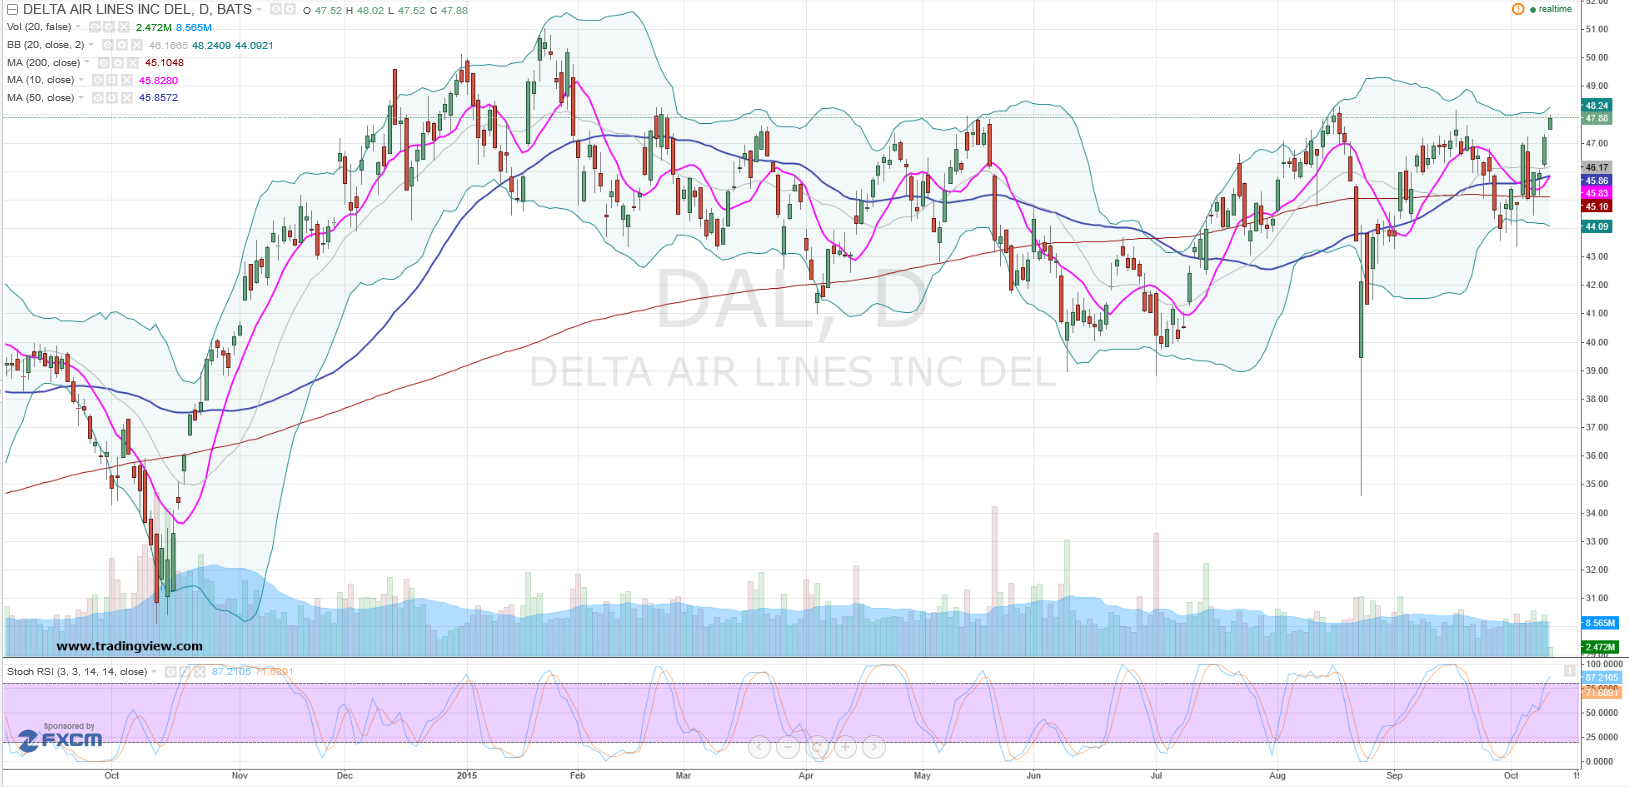 Delta Stock Primed to Take Off After Earnings (DAL) InvestorPlace